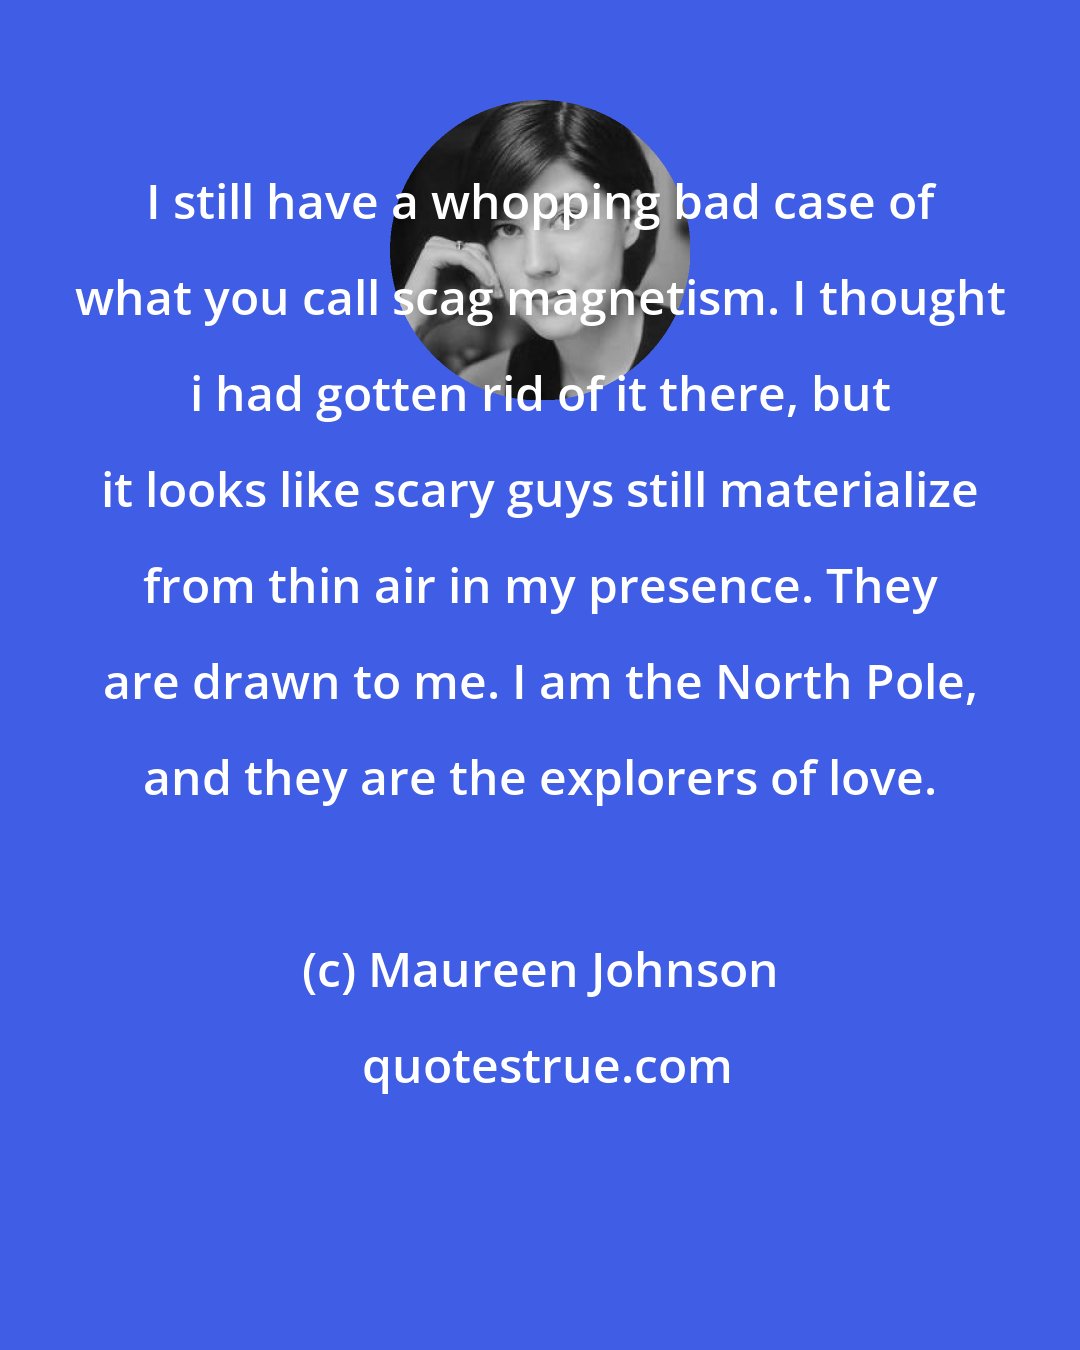 Maureen Johnson: I still have a whopping bad case of what you call scag magnetism. I thought i had gotten rid of it there, but it looks like scary guys still materialize from thin air in my presence. They are drawn to me. I am the North Pole, and they are the explorers of love.